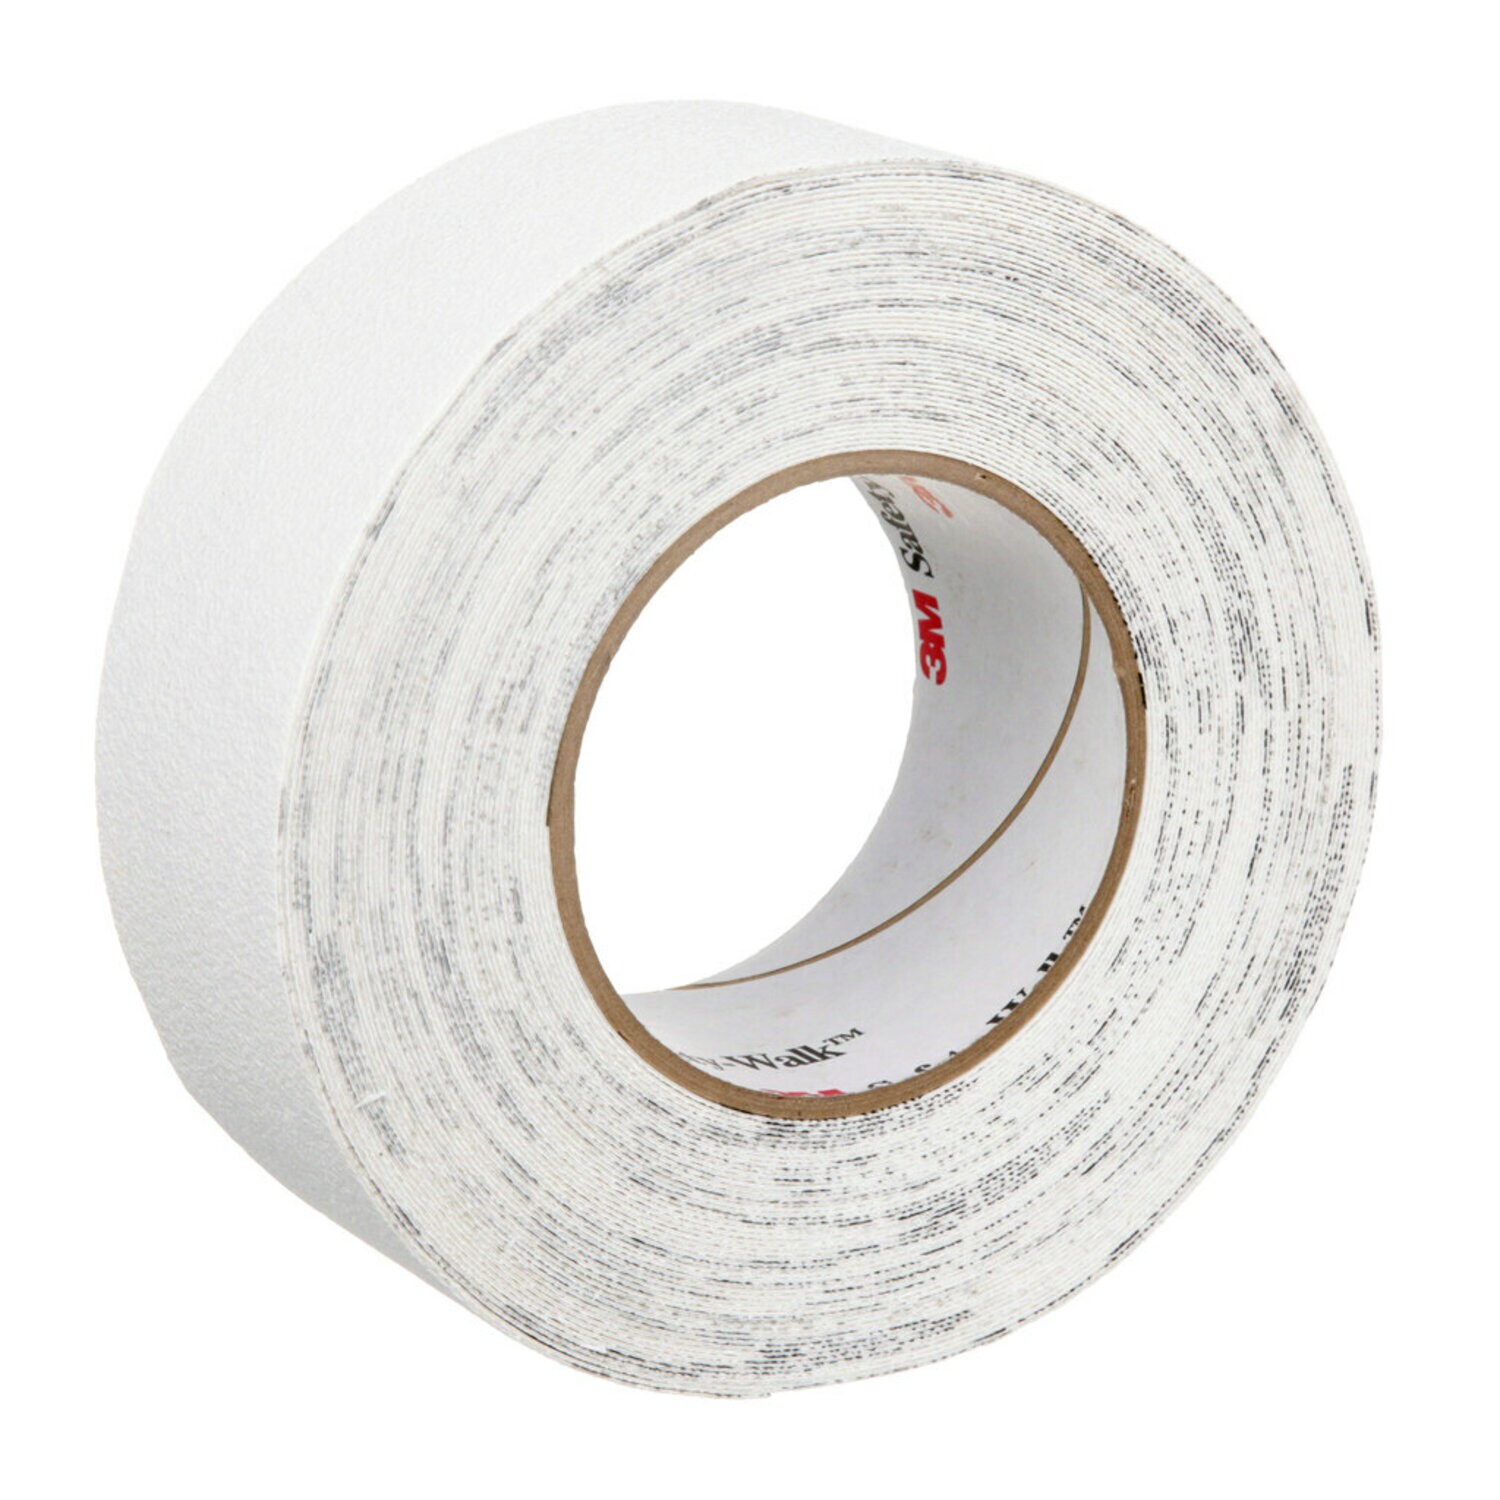 7000126122 - 3M Safety-Walk Slip-Resistant Fine Resilient Tapes & Treads 280,
White, 2 in x 60 ft, 2 Rolls/Case